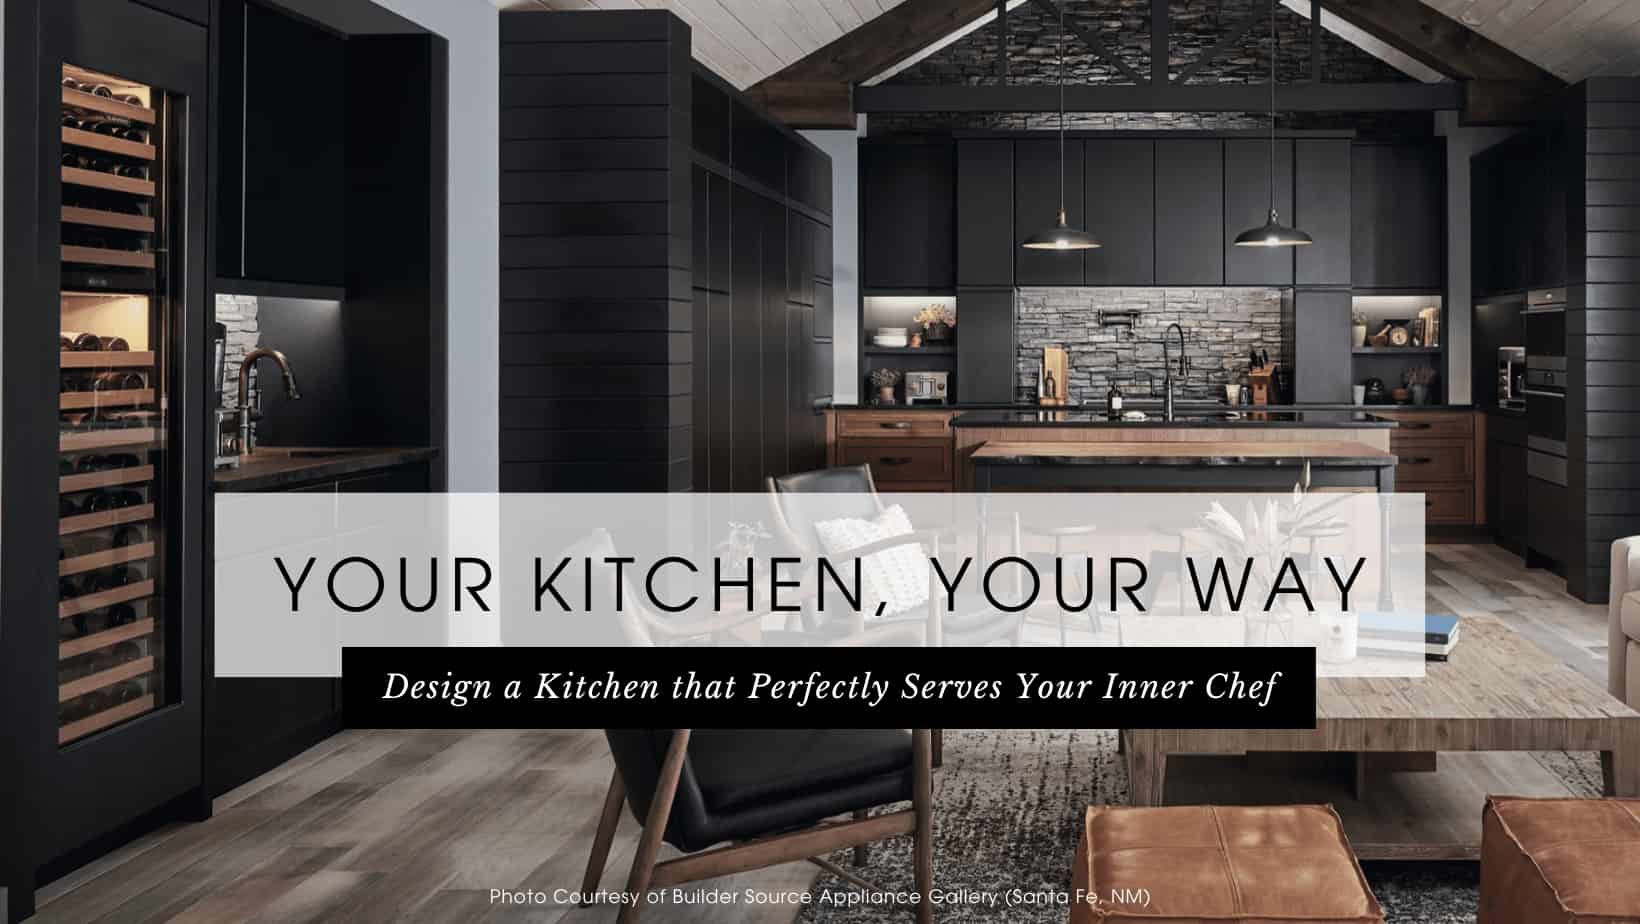 How to Design Kitchen for the At-Home Chef